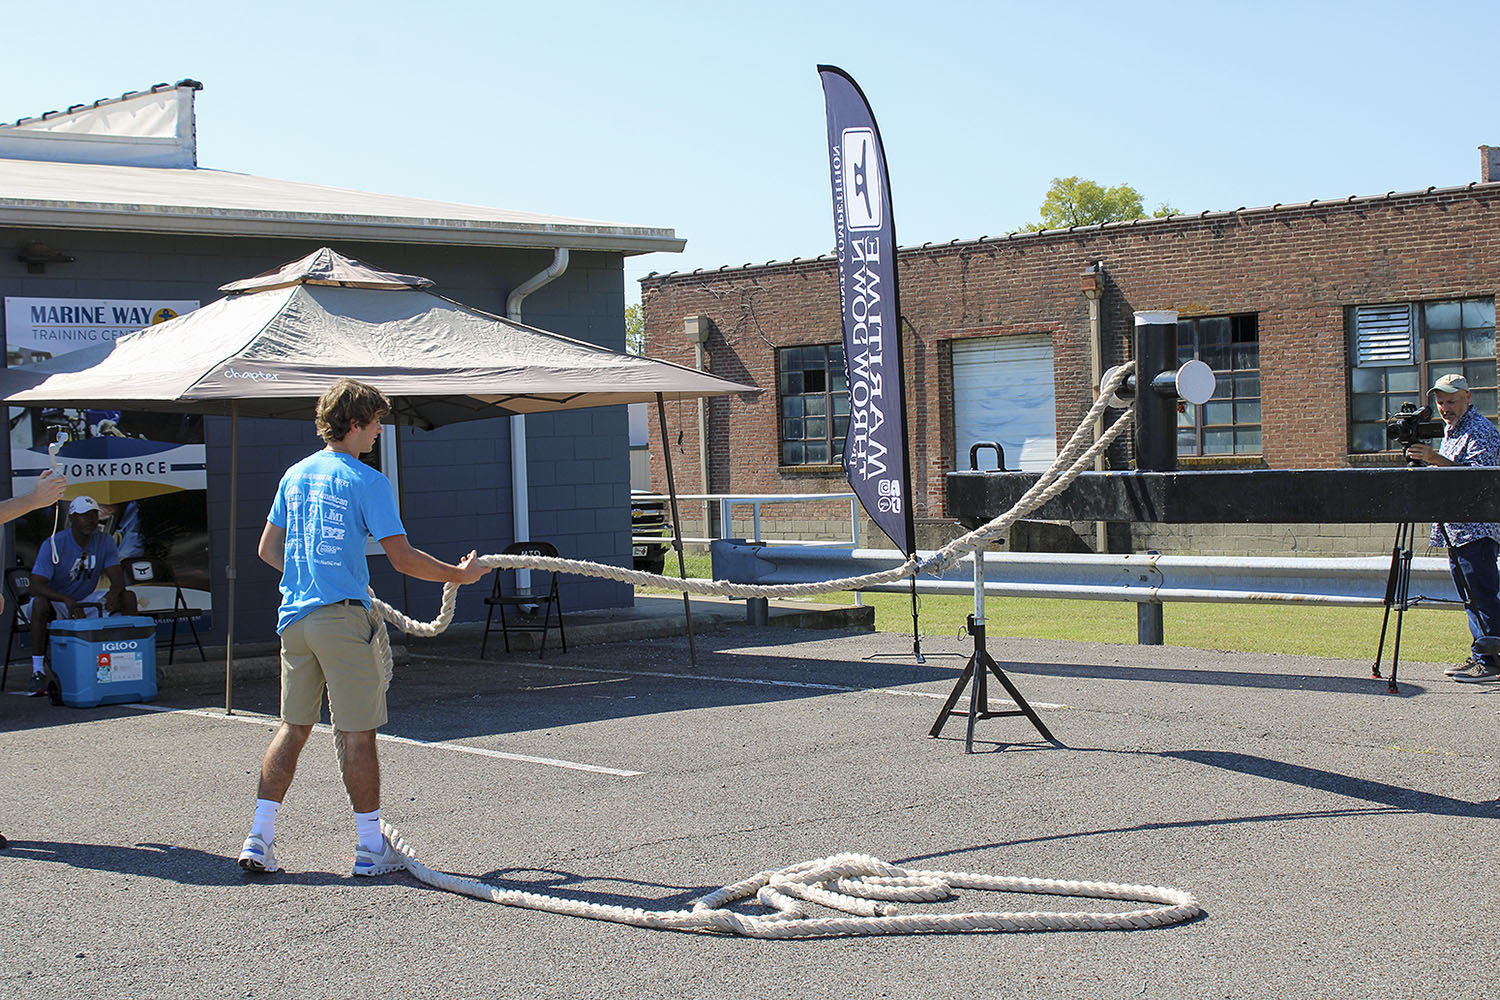 A St. Mary High School student practices throwing a line as part of a station sponsored by Maritime Throwdown. (Photo by Shelley Byrne)